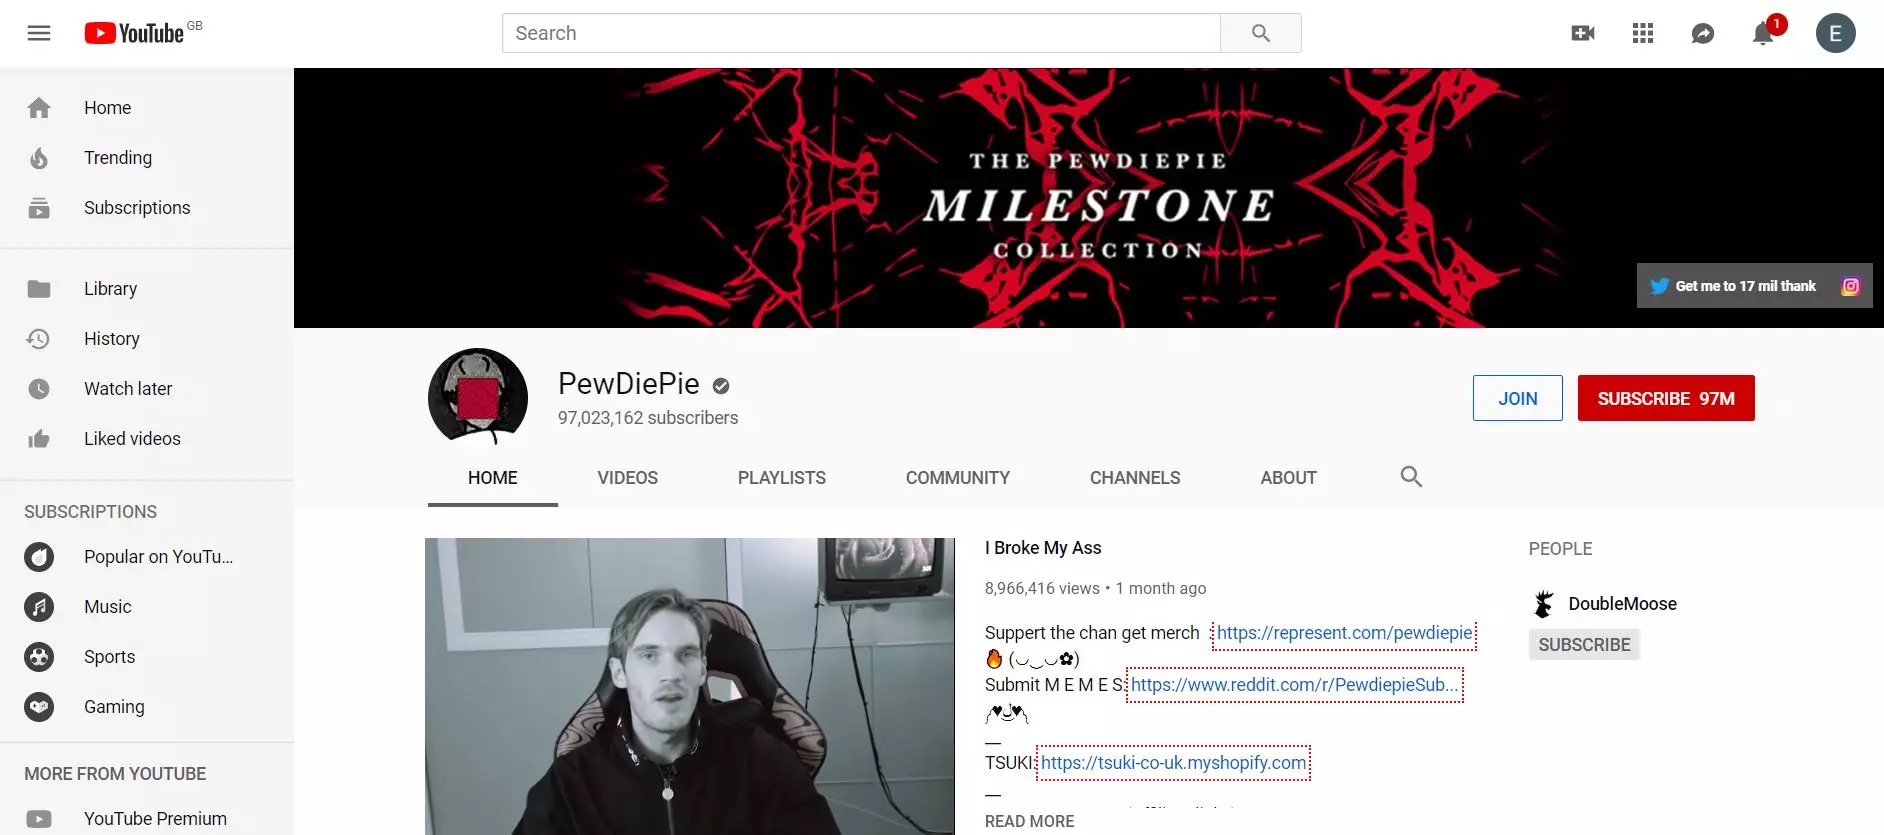 PewDiePie YouTube Channel Has Over 97 Million Followers.